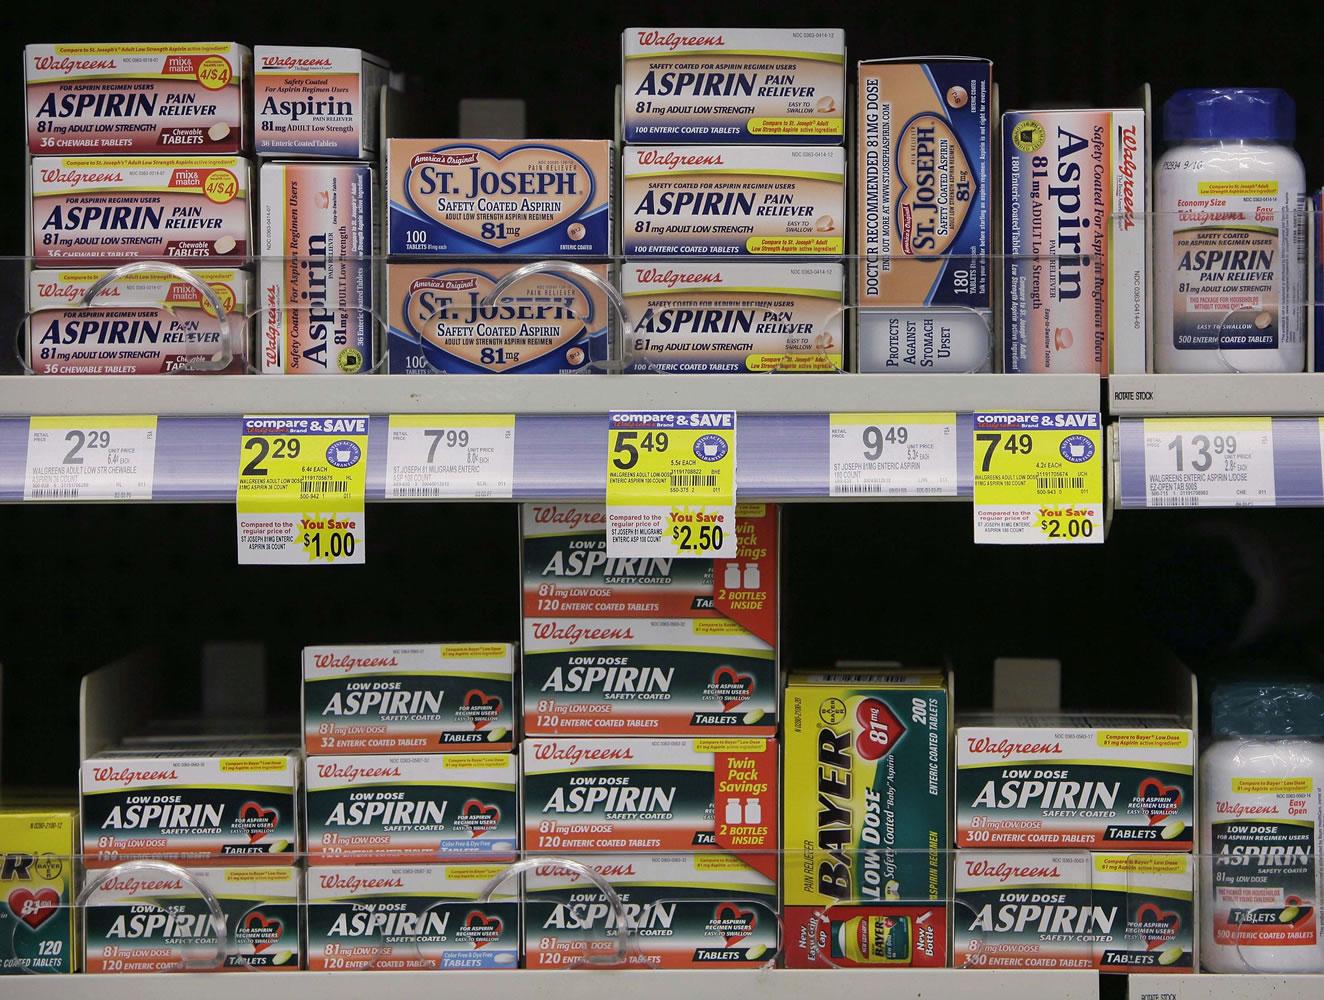 FILE - This Tuesday, Aug. 11, 2009 file photo shows packages of aspirin on the shelves of a drugstore in Chicago. In results published in the Journal of the American Medical Association on Tuesday, March 17, 2015, aspirin users were less likely than nonusers to get colon or rectal cancer if they had genetic traits found in about 90 percent of the participants. Cancer patients were less likely to have the beneficial traits, and less likely to be frequent aspirin users. (AP Photo/M.